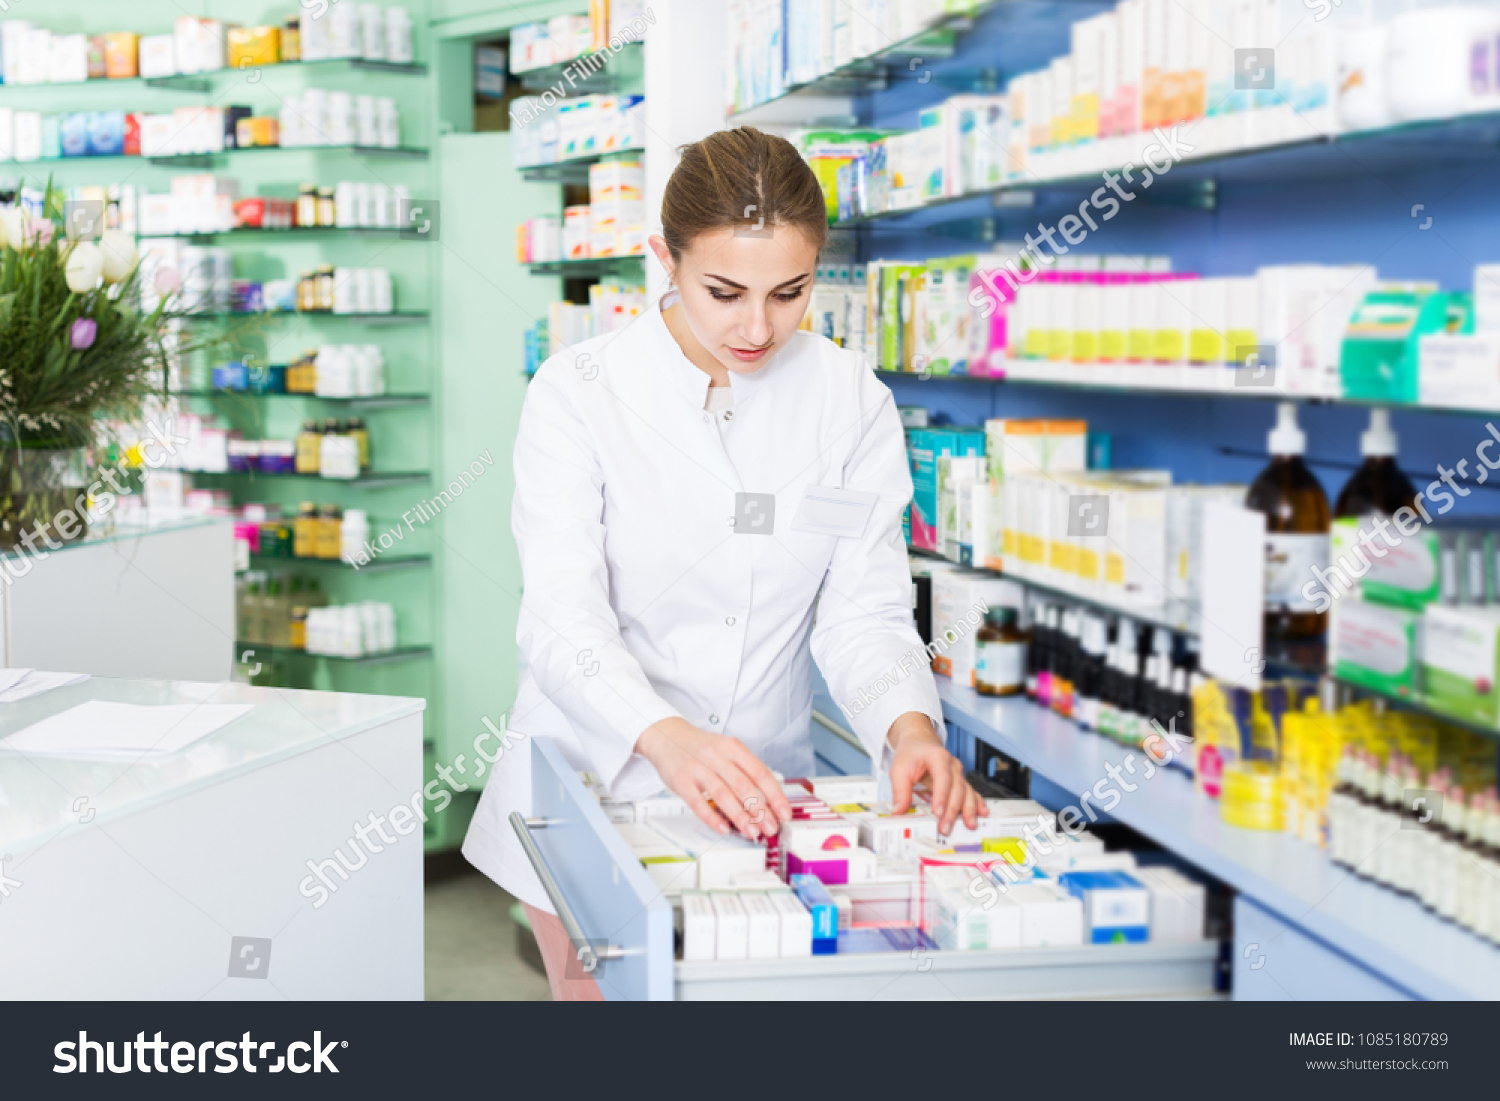 Woman specialist is attentively looking medicines in lockers in pharmacy #1085180789